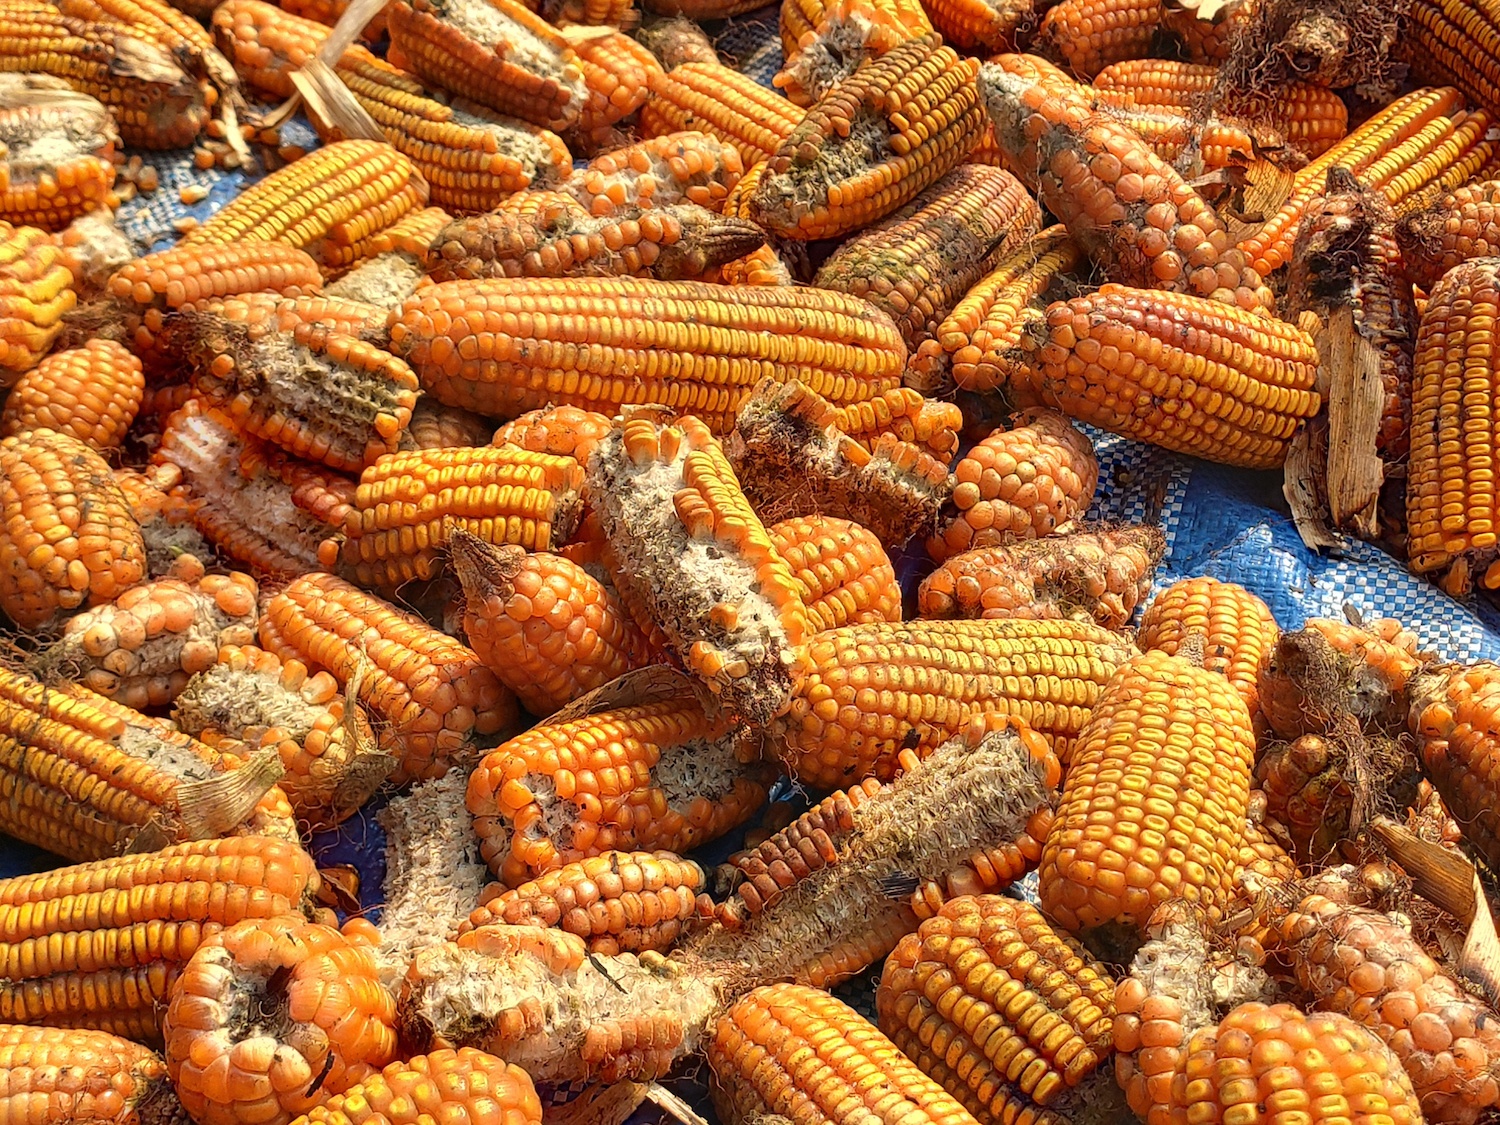 corn rot,The fungi A. flavus and A. parasiticus producer of mycotoxin in corn used for food and animal feed in storage. November 2020